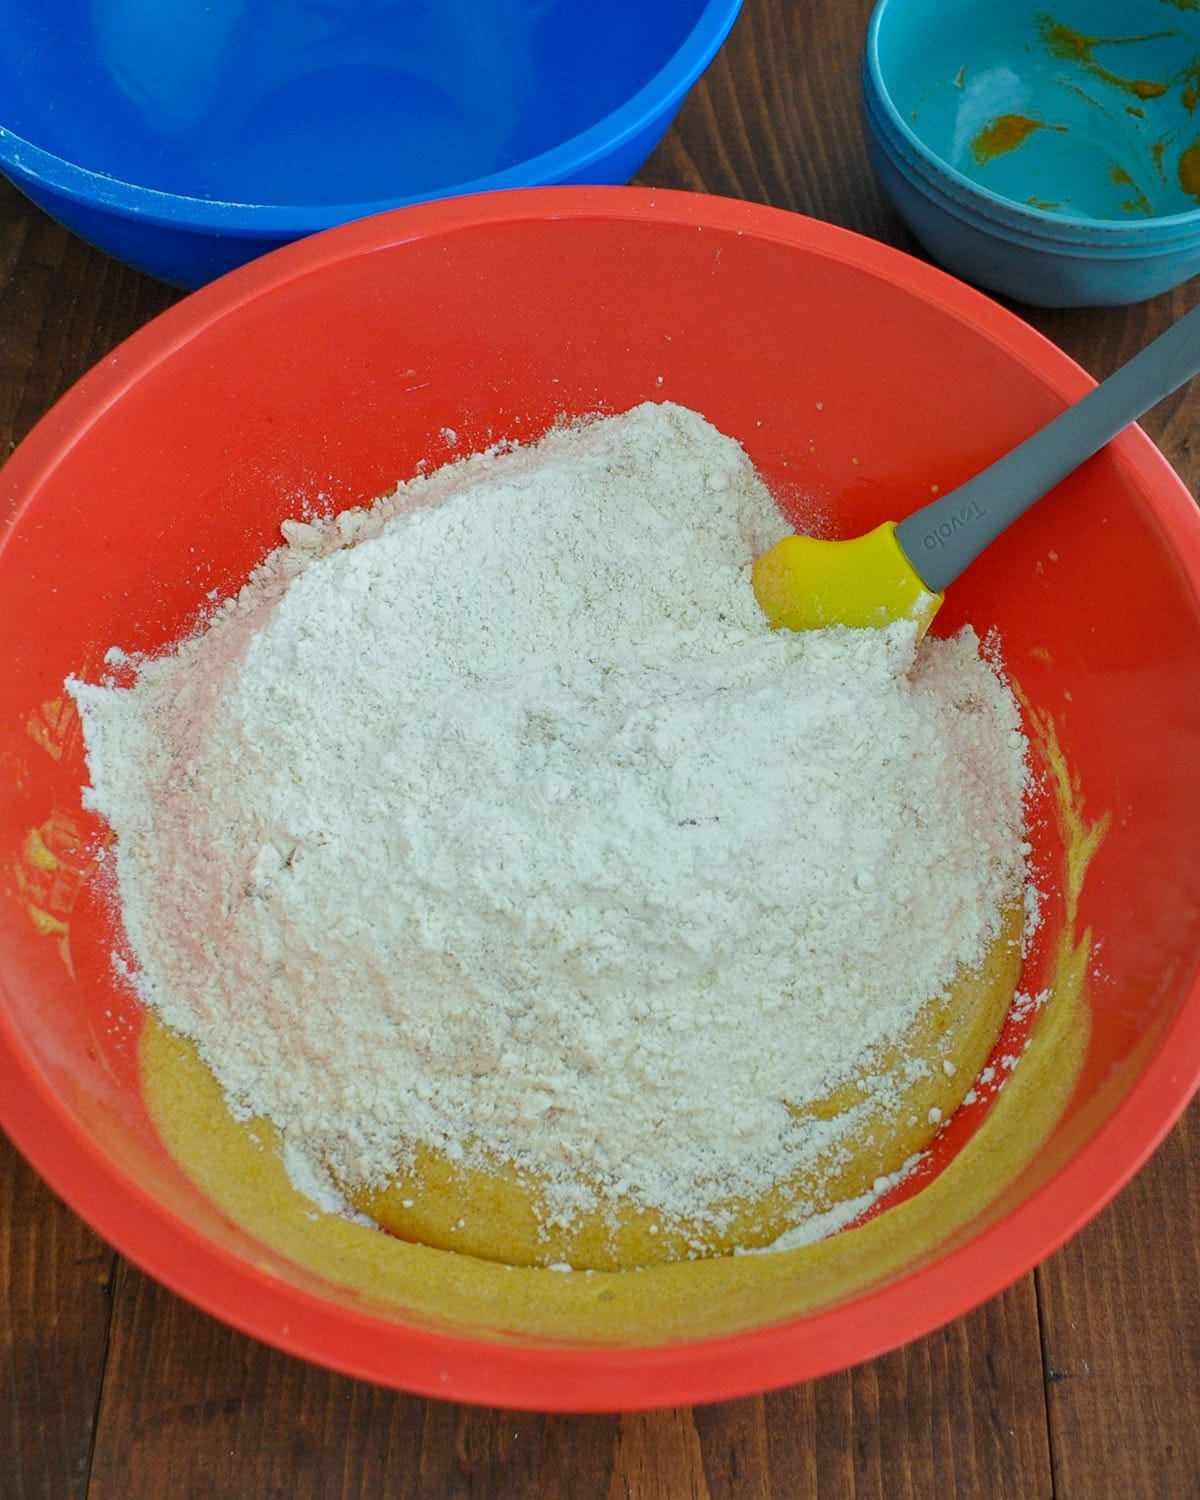 flour and pumpkin spices added to the wet cookie dough ingredients in a large bowl